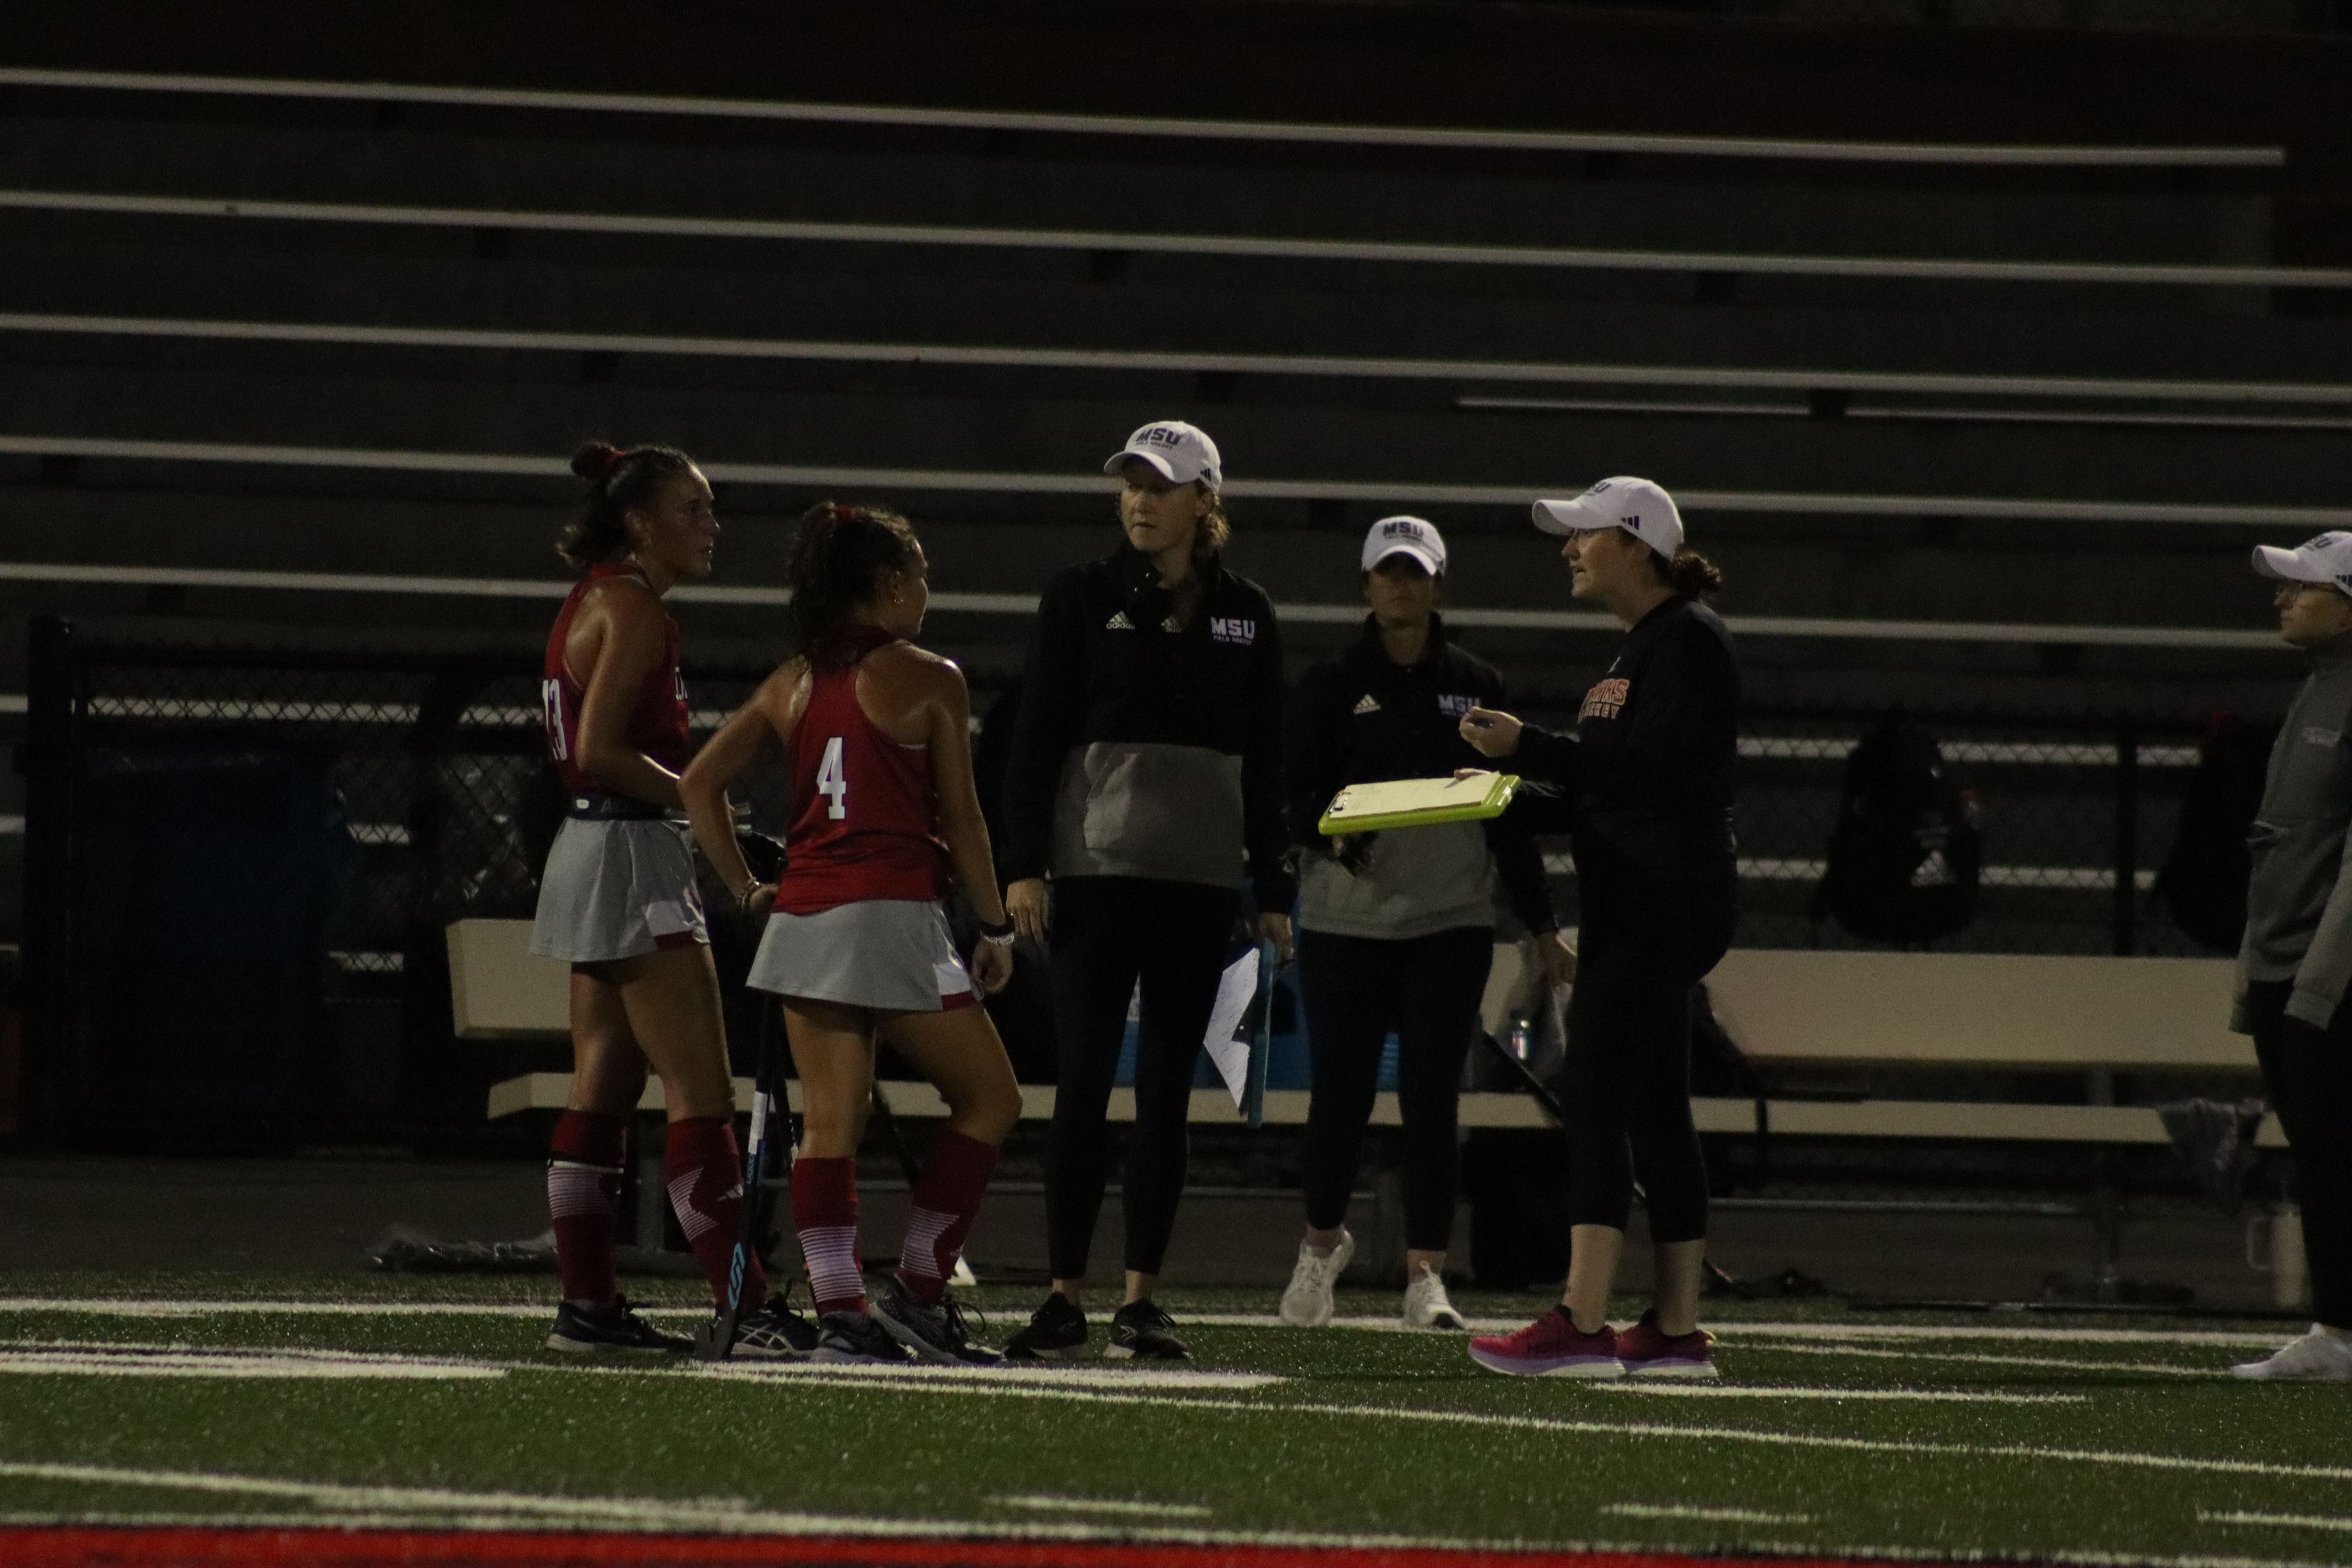 Tori Sutera and Kylie Compton talking things over with the Montclair State staff. Photo courtesy of Trevor Giesberg